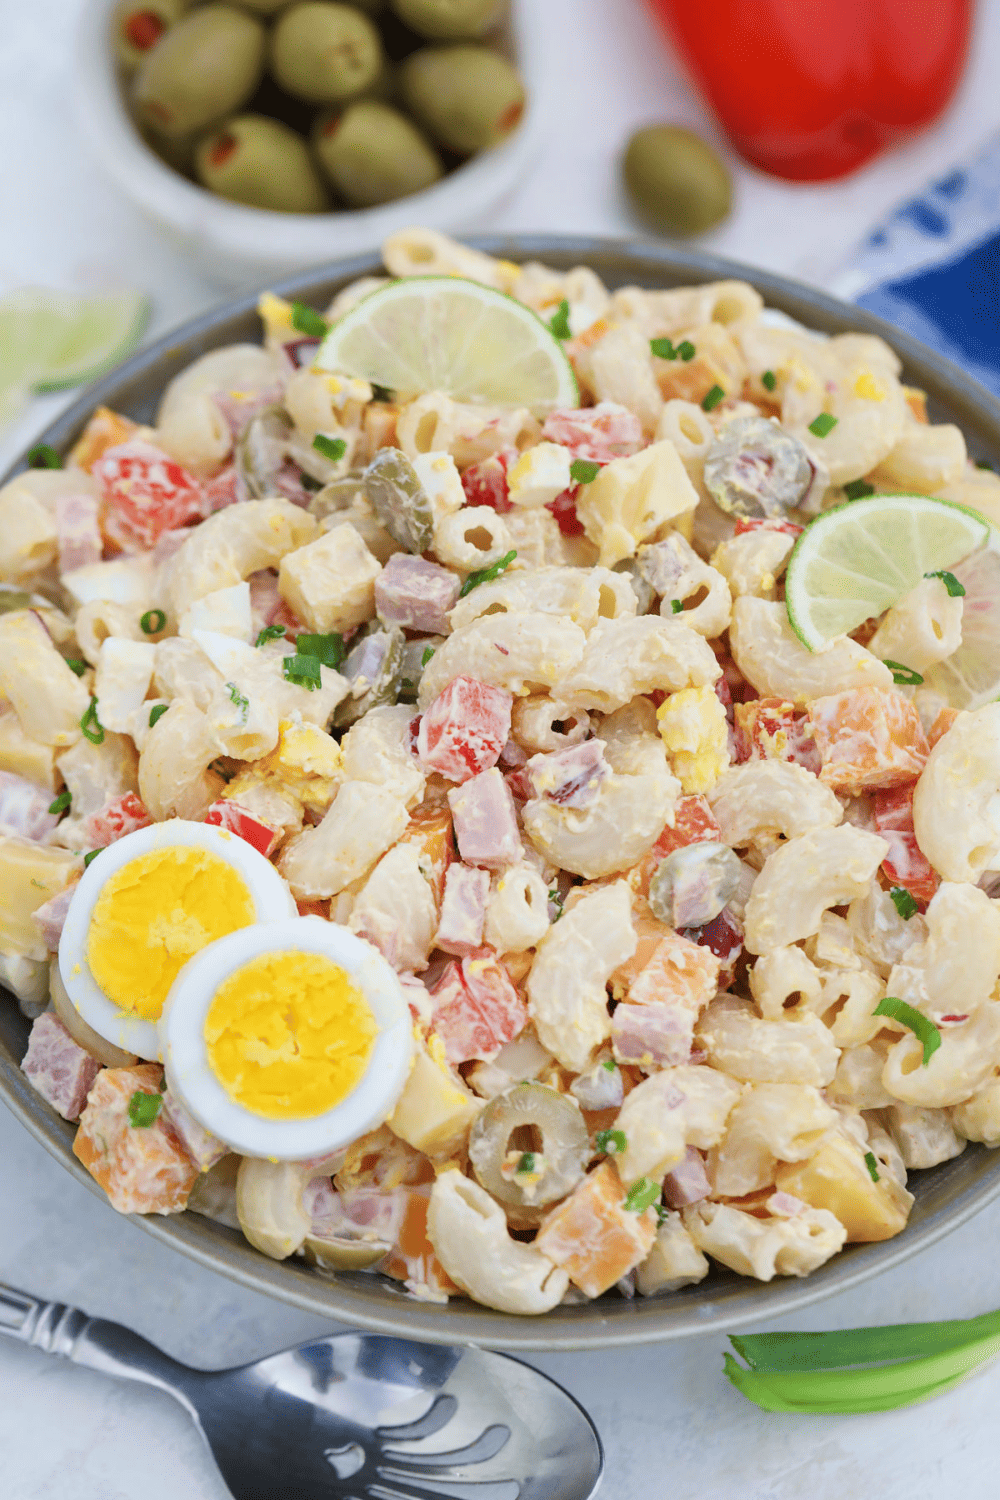 Experience the rich and creamy flavors of Puerto Rican Macaroni Salad - the perfect side dish for any occasion! 🥗🇵🇷 via @mystayathome